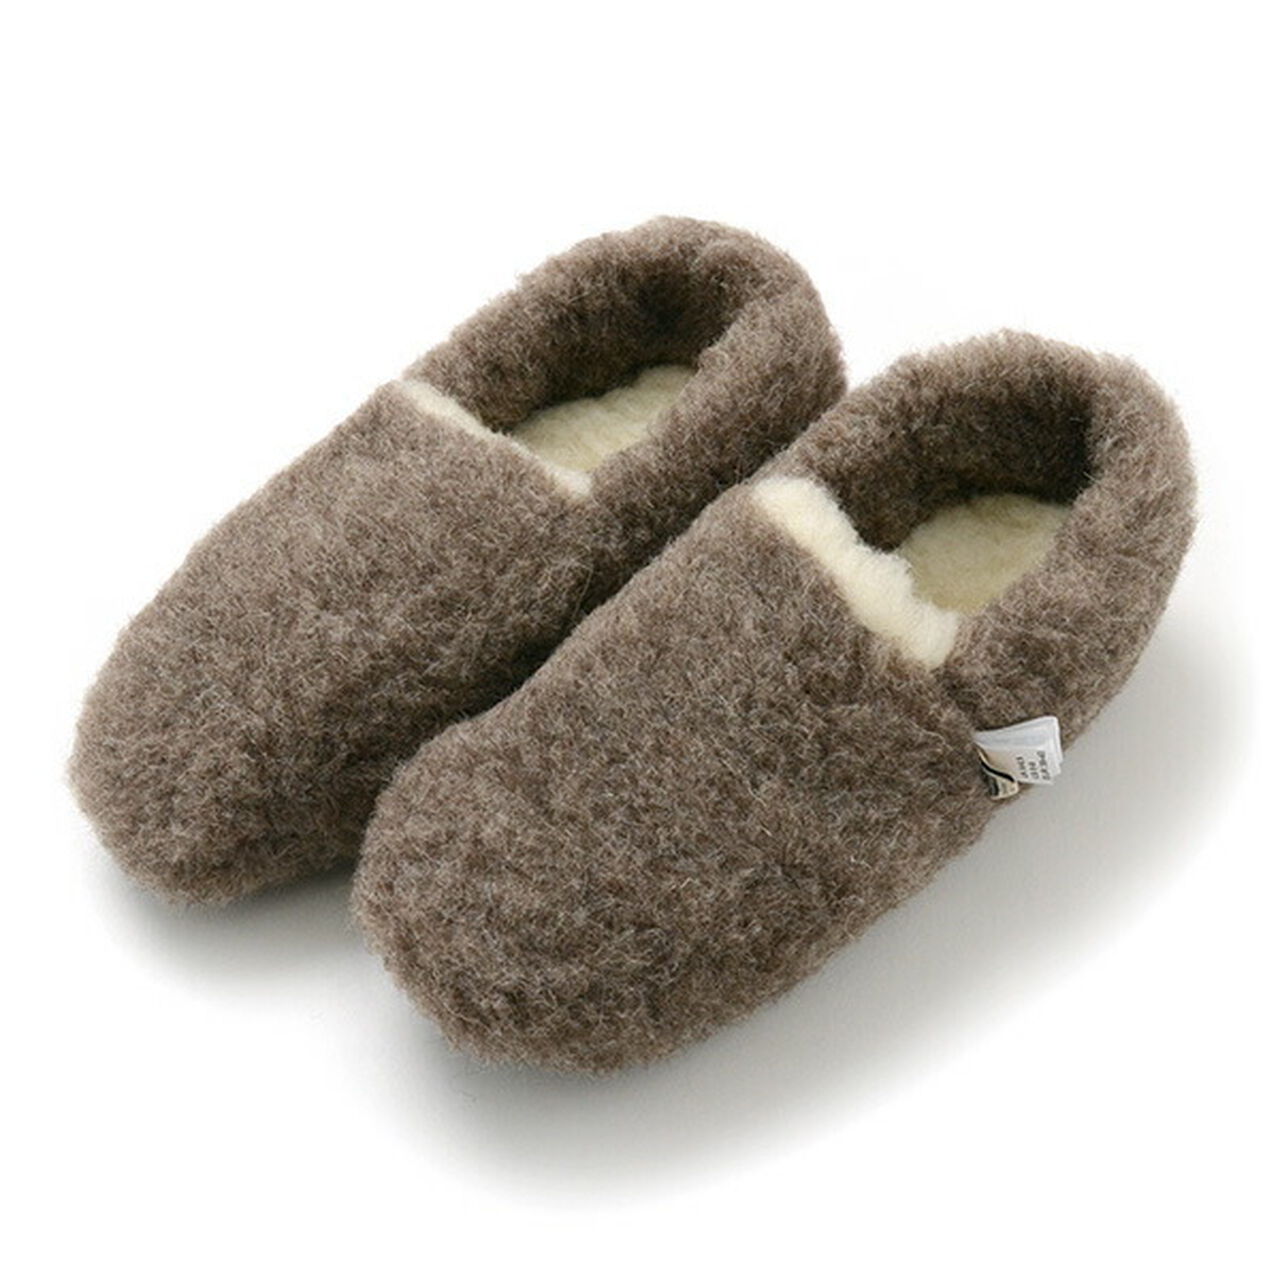 Boa Wool Shorty Slippers,MidBrown, large image number 0